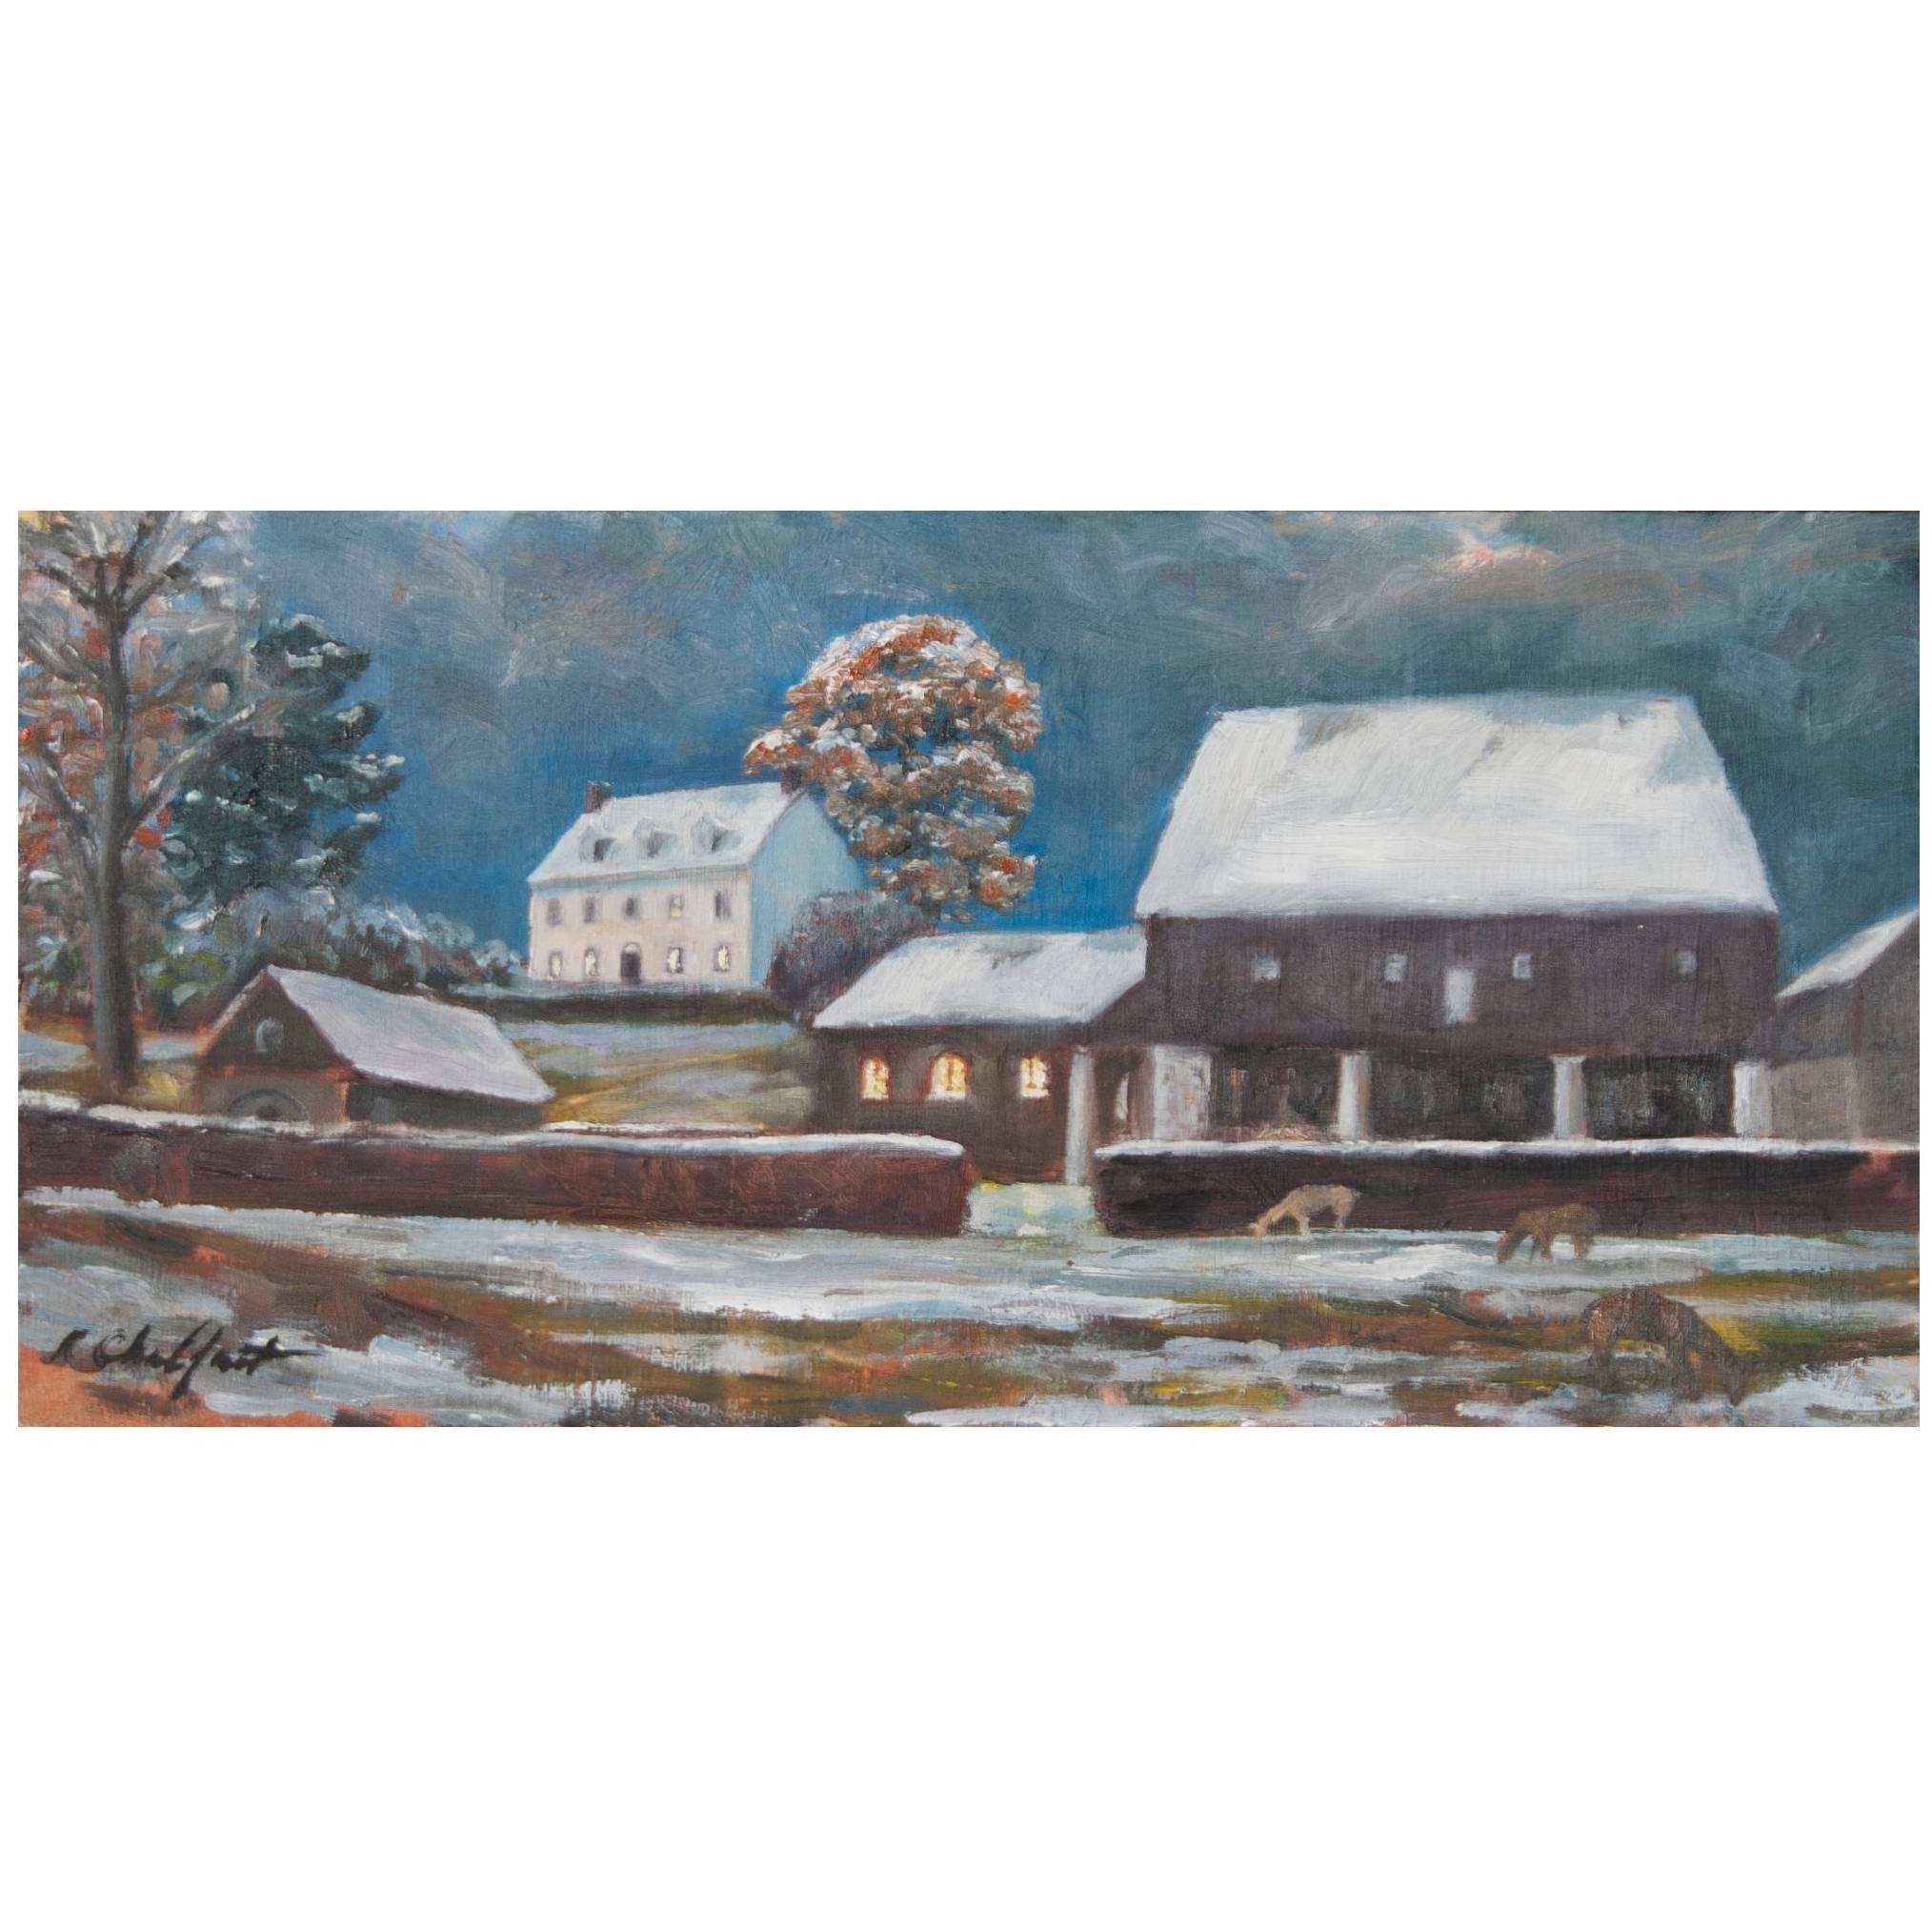 "Early Snow" Painting by Richard Chalfant